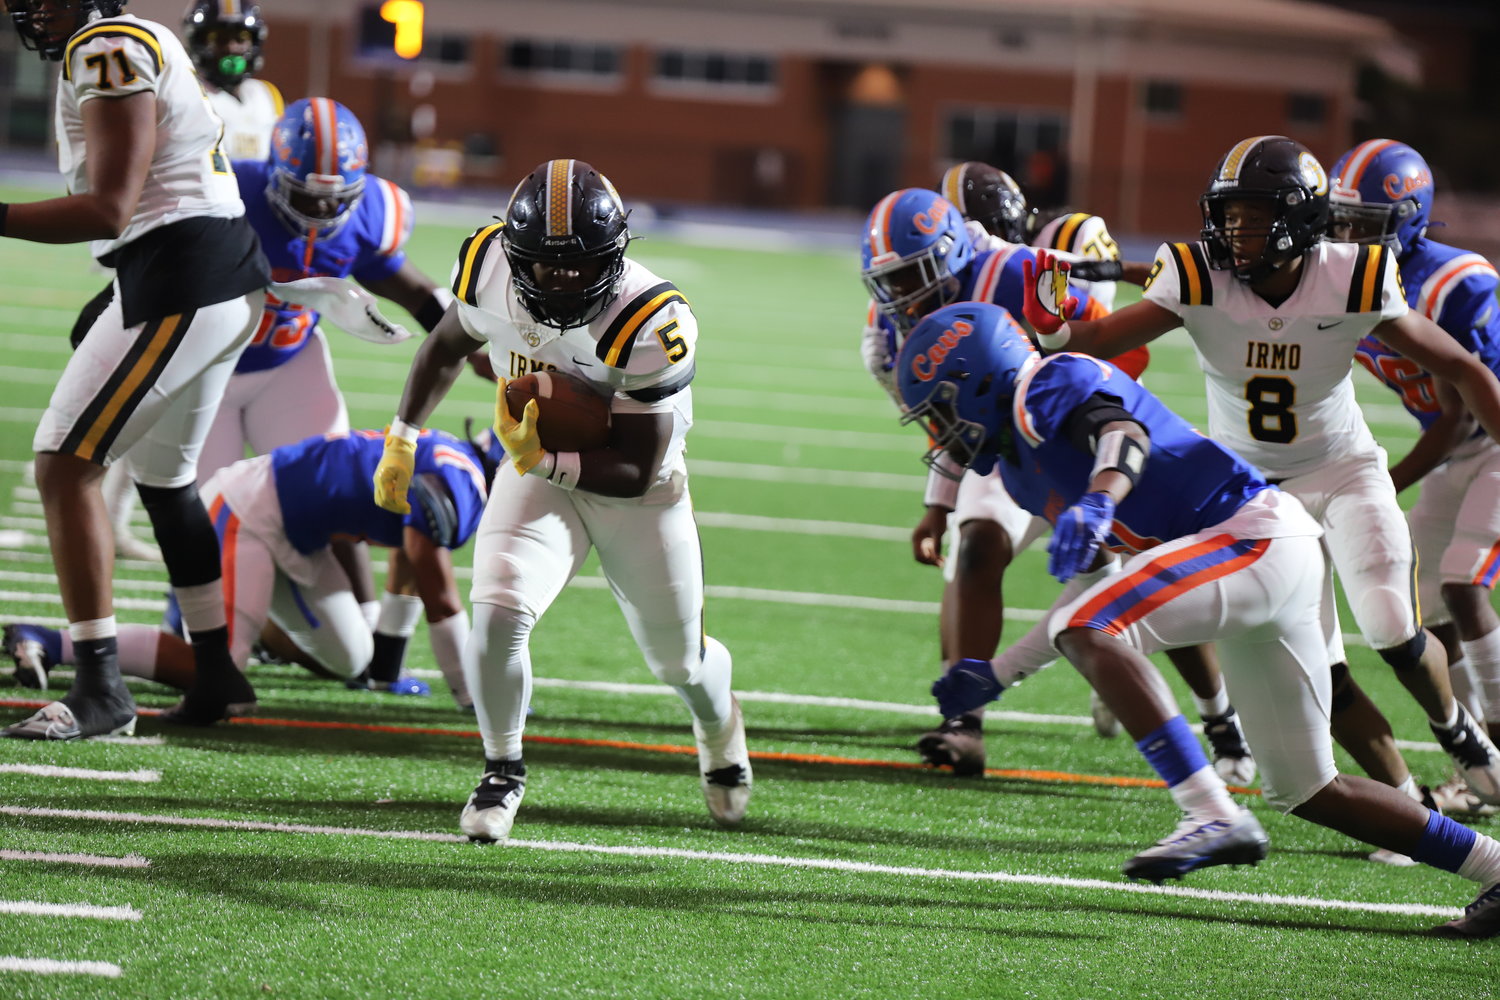 Irmo running back Erick Tucker with the first of his two touchdown runs.